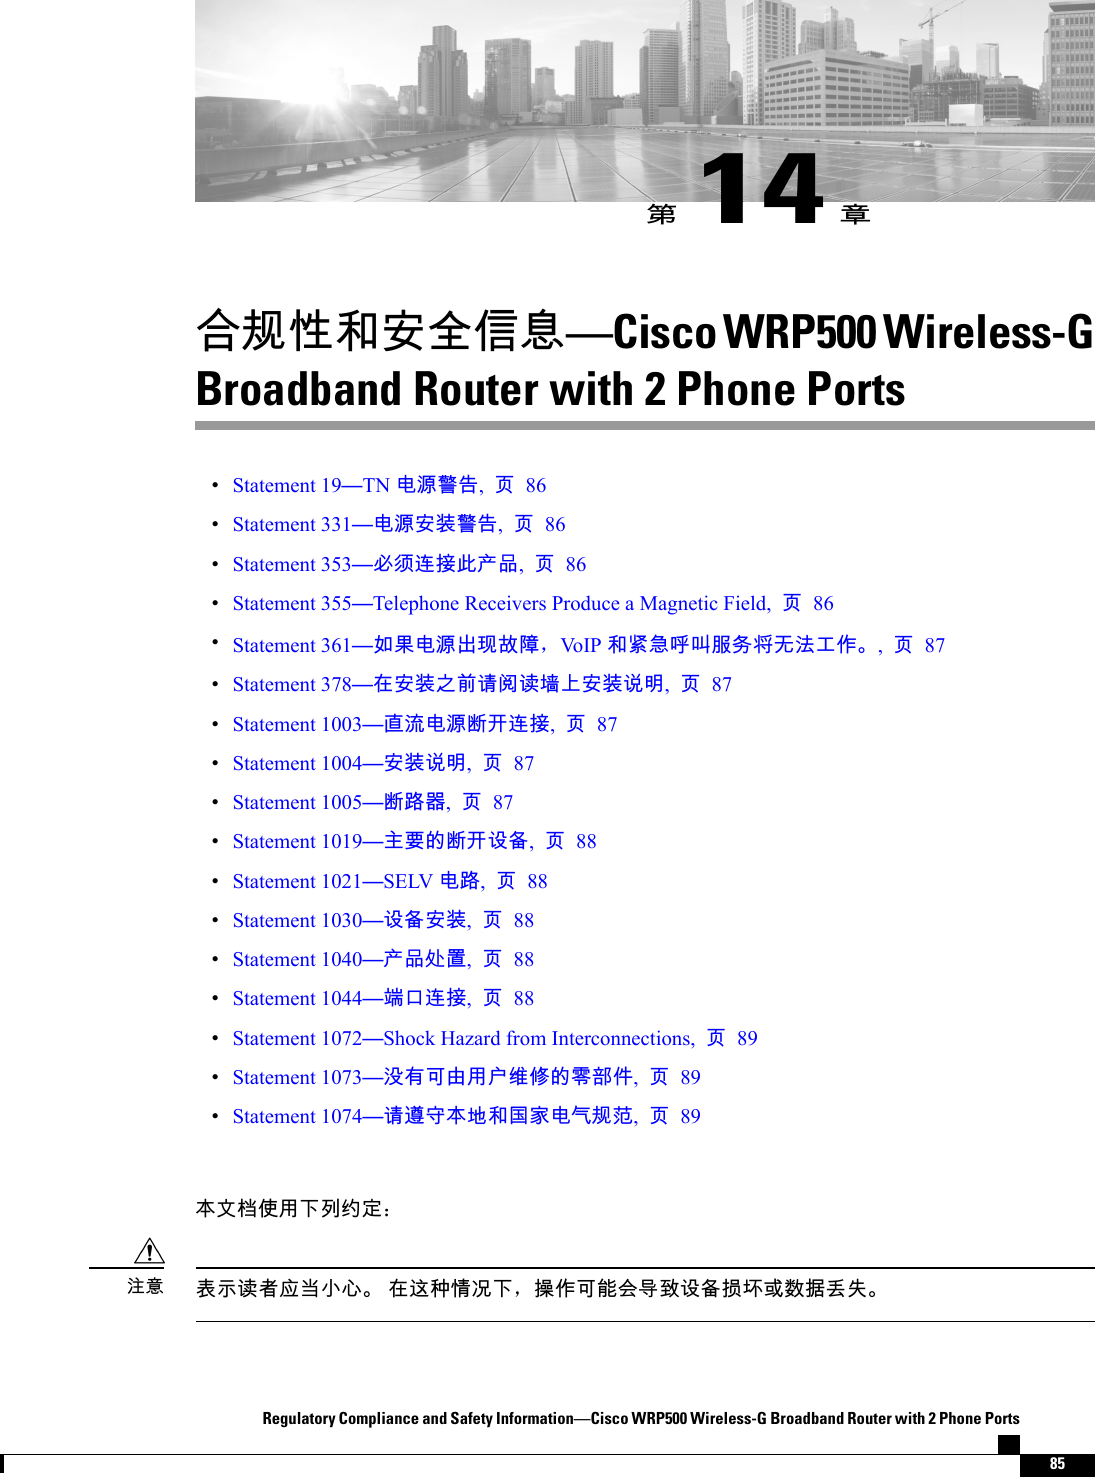 󳒼14󳑰󰶘󴍔󱦷󰸜󱔙󰫸󰥱󱧿Cisco WRP500 Wireless-GBroadband Router with 2 Phone PortsStatement 19TN 󲻅󲠠󴓶󰷚,󵈅86Statement 331󲻅󲠠󱔙󴉕󴓶󰷚,󵈅86Statement 353󱥕󵈋󴥮󱴵󲓴󰠷󰹑,󵈅86Statement 355Telephone Receivers Produce a Magnetic Field, 󵈅86Statement 361󱌒󲄬󲻅󲠠󰮊󲵀󱻕󵀬，VoIP 󰸜󳚷󱦵󰸌󰵻󲂝󰰱󱖖󱽰󲙥󱝵󰣬,󵈅87Statement 378󱂸󱔙󴉕󰟛󰯝󴖇󴾕󴖋󱈩󰞚󱔙󴉕󴖄󱾞,󵈅87Statement 1003󳂄󲛑󲻅󲠠󱼽󱢐󴥮󱴵,󵈅87Statement 1004󱔙󴉕󴖄󱾞,󵈅87Statement 1005󱼽󴝿󰿸,󵈅87Statement 1019󰟋󴌑󳀔󱼽󱢐󴕎󱊗,󵈅88Statement 1021SELV 󲻅󴝿,󵈅88Statement 1030󴕎󱊗󱔙󴉕,󵈅88Statement 1040󰠷󰹑󱊔󳣾,󵈅88Statement 1044󳑿󰵳󴥮󱴵,󵈅88Statement 1072Shock Hazard from Interconnections, 󵈅89Statement 1073󲘱󲂙󰵿󲻁󲺸󱯇󳢄󰥾󳀔󵂆󴩸󰢆,󵈅89Statement 1074󴖇󴨅󱔘󲂼󱃀󰸜󱂍󱕆󲻅󲖤󴍔󳲓,󵈅89󲂼󱼗󲇳󰤏󲺸󰞛󰮧󳠶󱔪：󴇸󳋊󴖋󳦕󱠤󱣣󱖟󱥓 󱂸󴥩󳍝󱩕󰭅󰞛，󱹝󰣬󰵿󳪍󰢪󱖌󳮄󴕎󱊗󱳯󱃟󱮦󱼀󱳾󰞲󱋁󲙸󱪟Regulatory Compliance and Safety InformationCisco WRP500 Wireless-G Broadband Router with 2 Phone Ports85